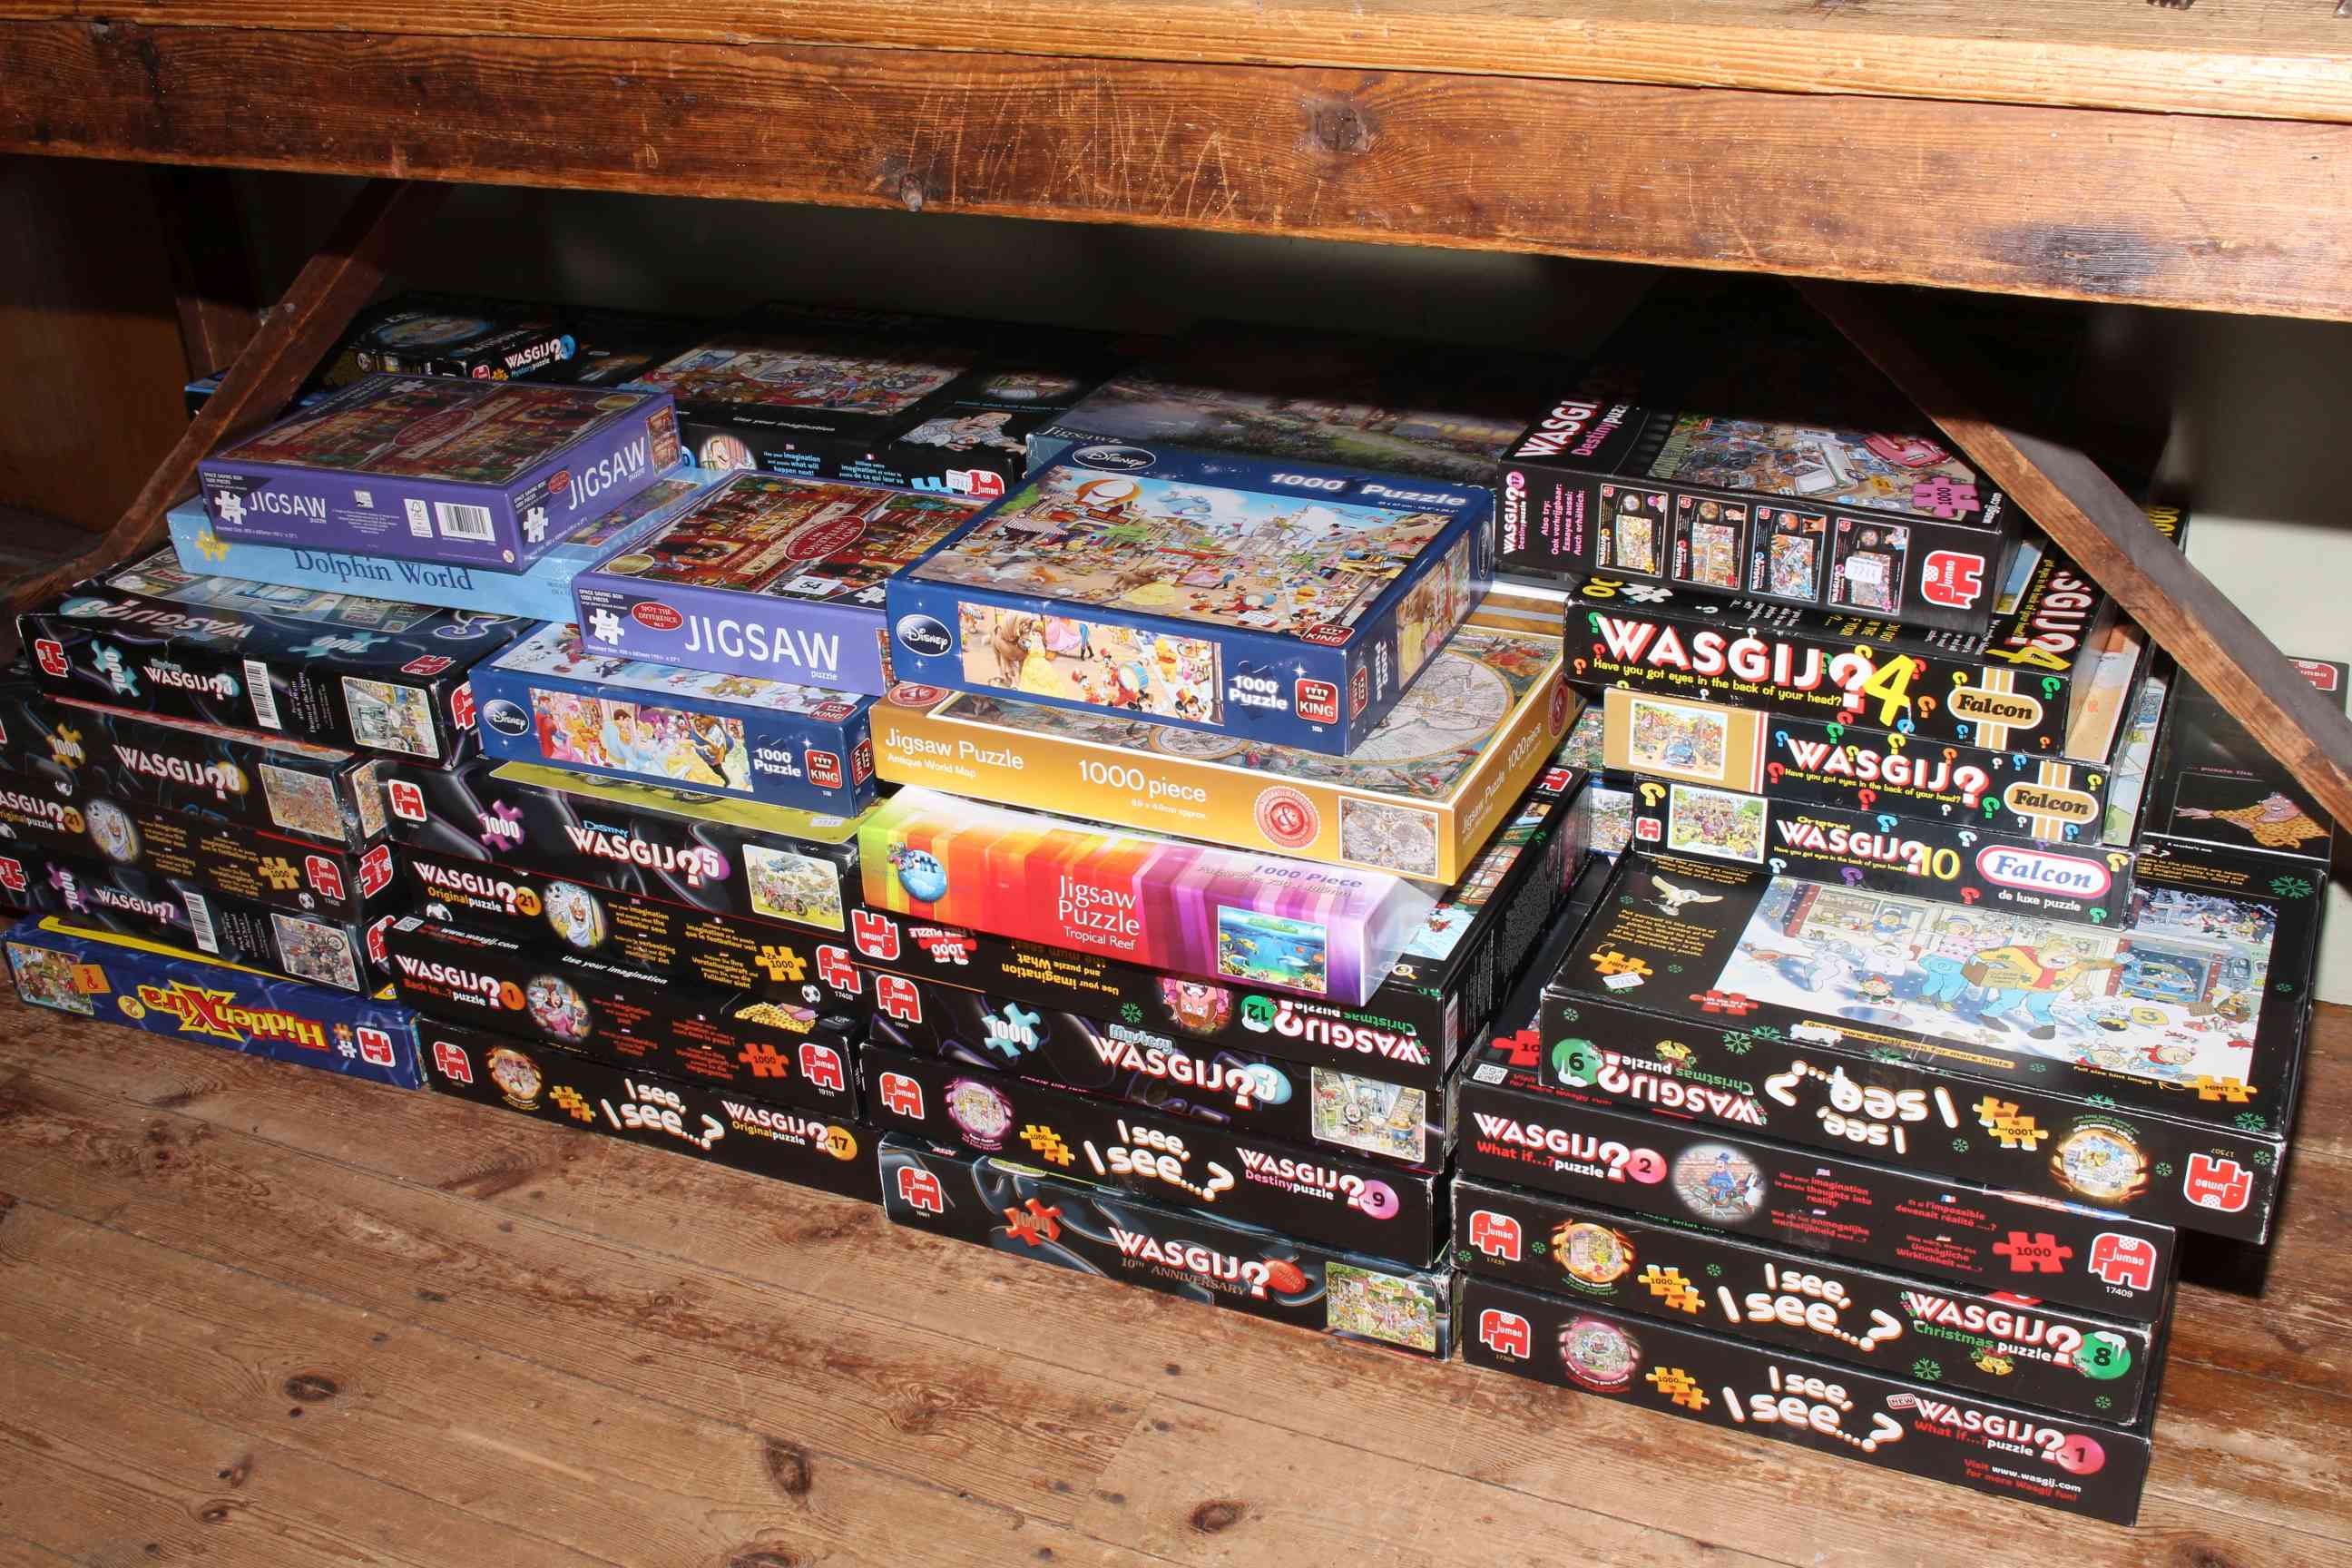 Large assortment of jigsaw puzzles.